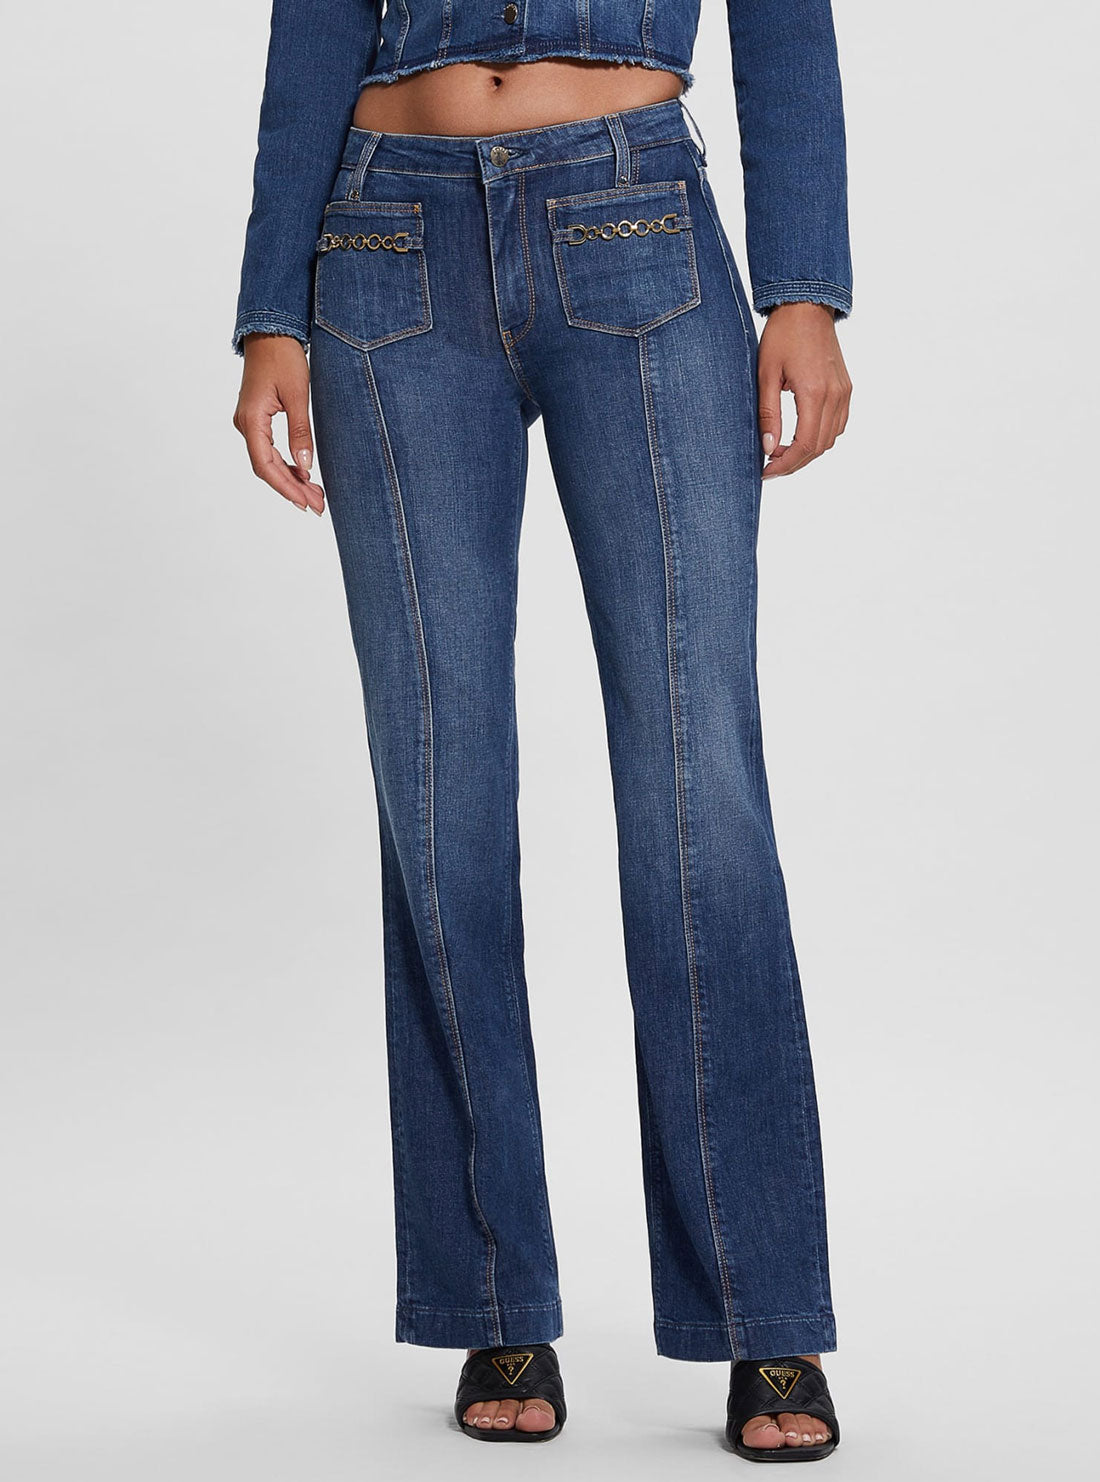 Eco Blue Chain Pocket Sexy Bootcut Denim Jeans | GUESS Women's Apparel | front view